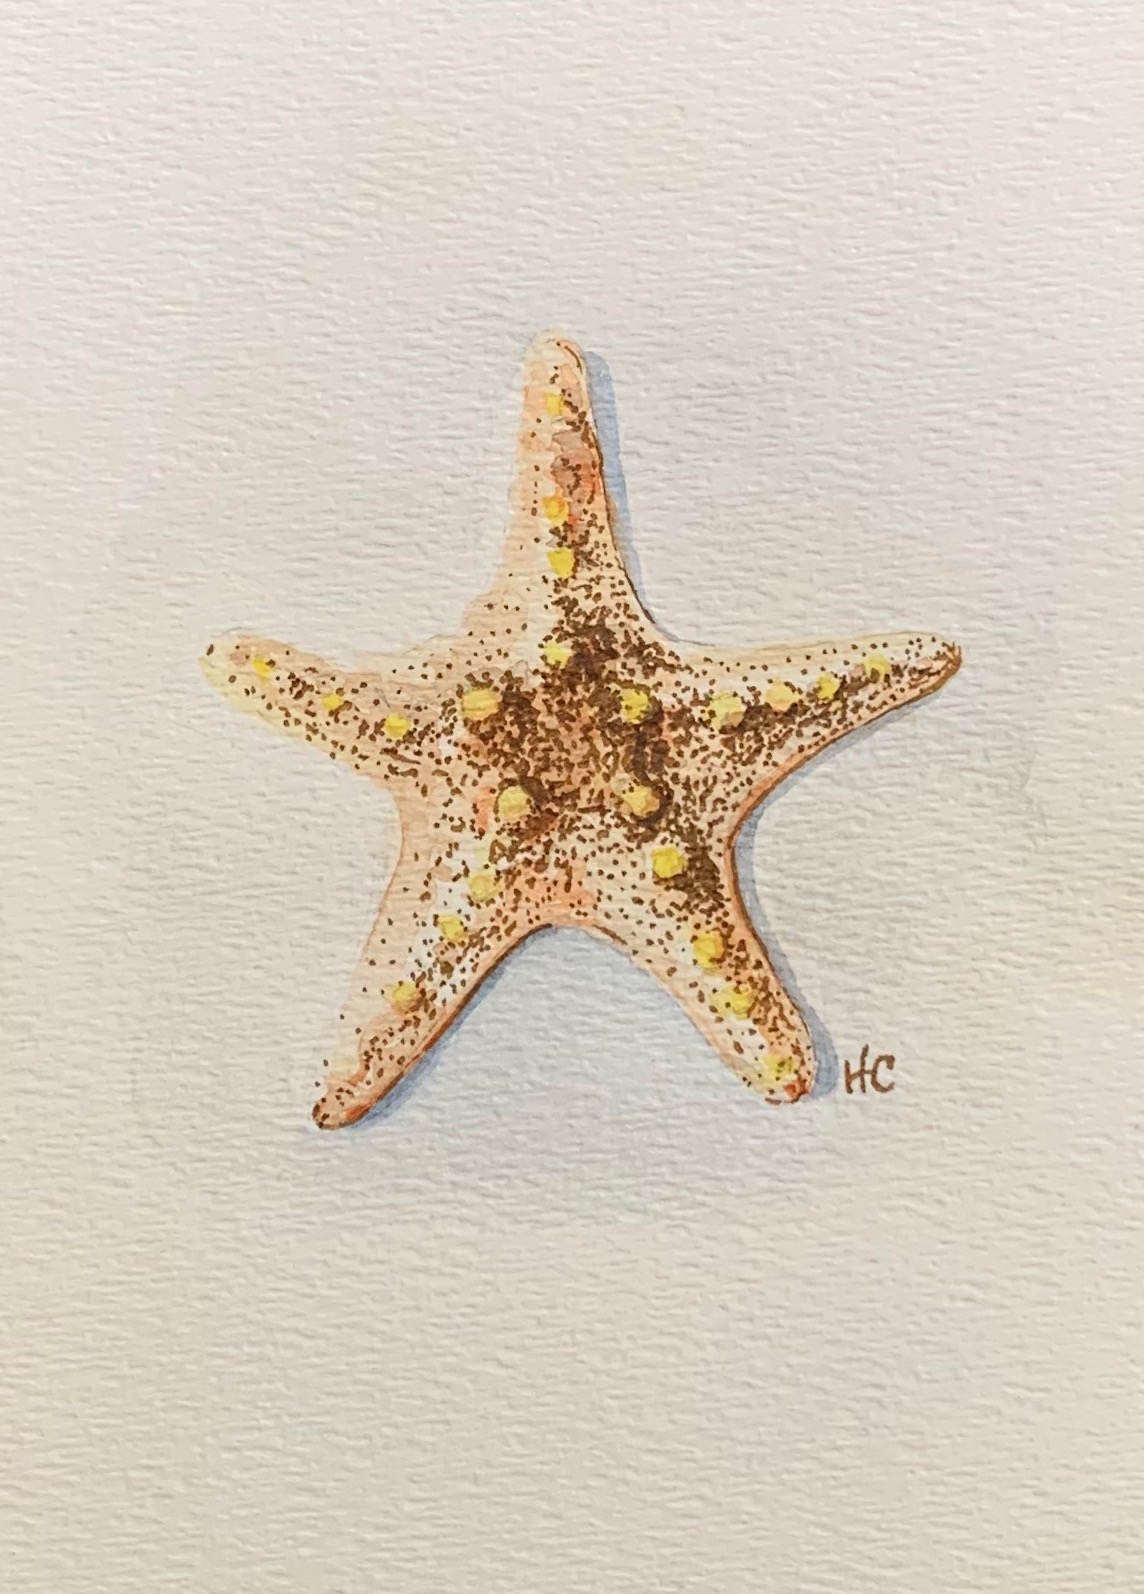 watercolor starfish with ink detail